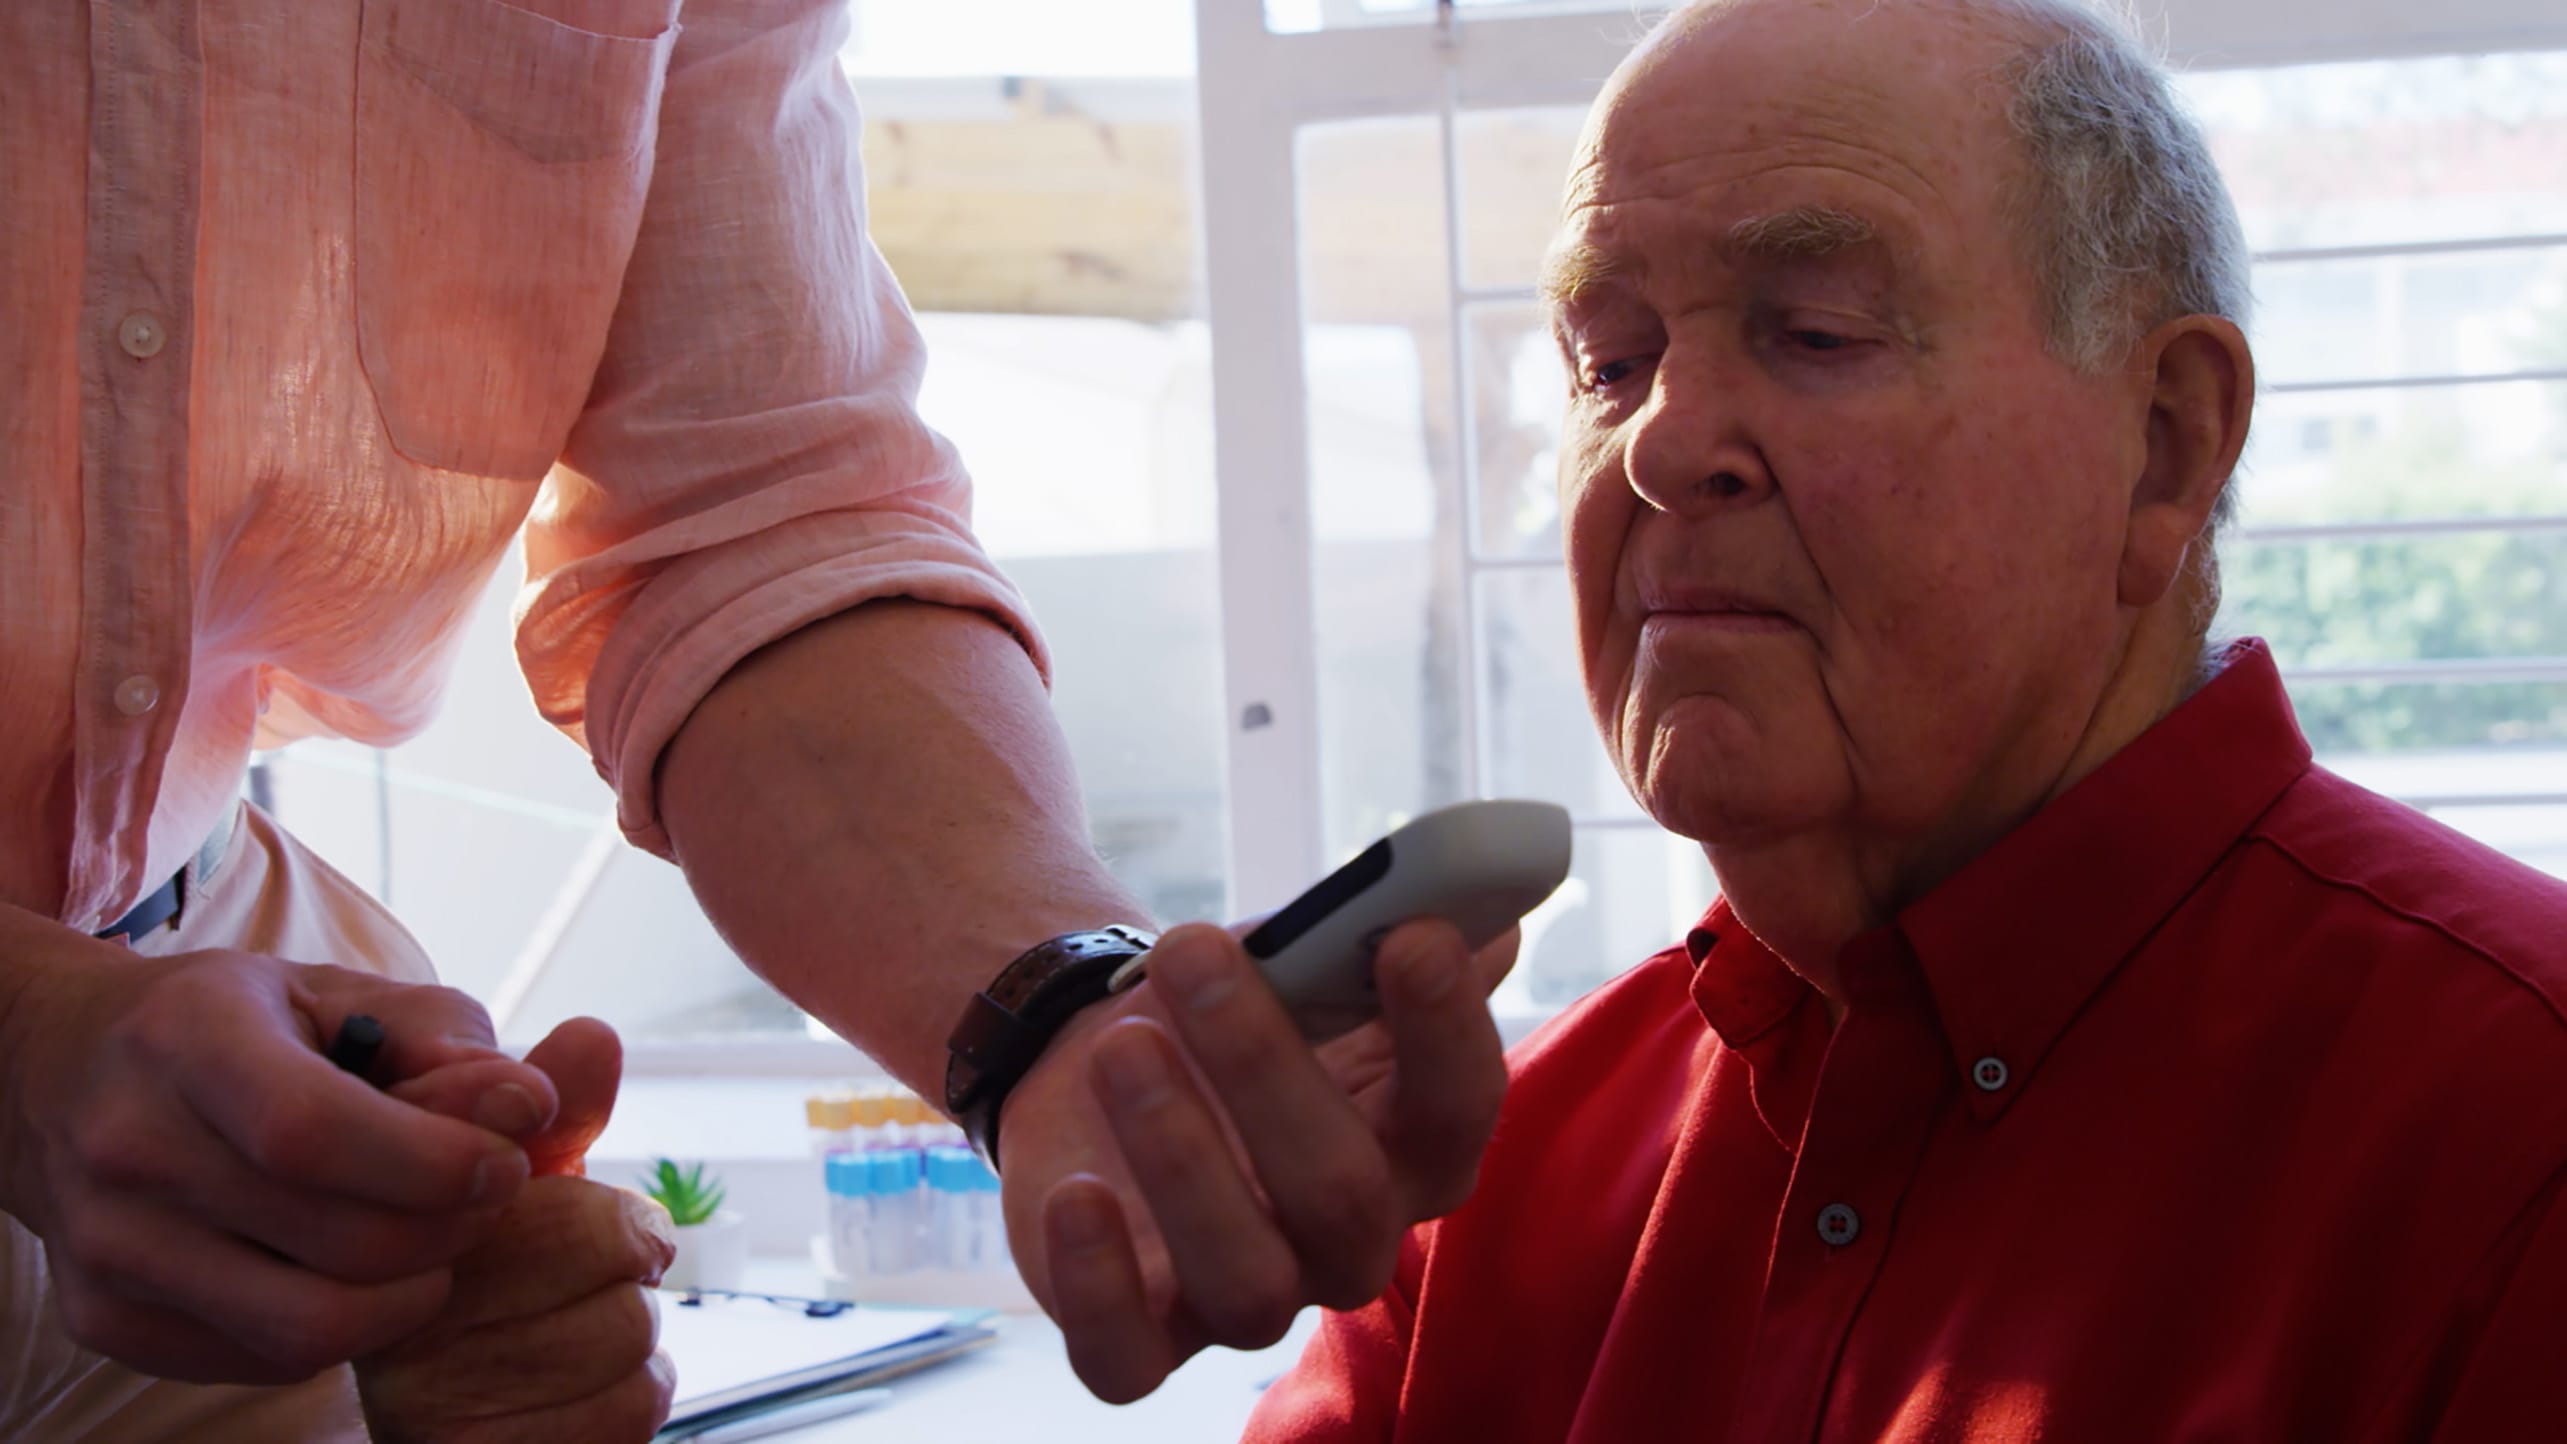 An elderly white man looks at a glucometer held by another person's extended hand